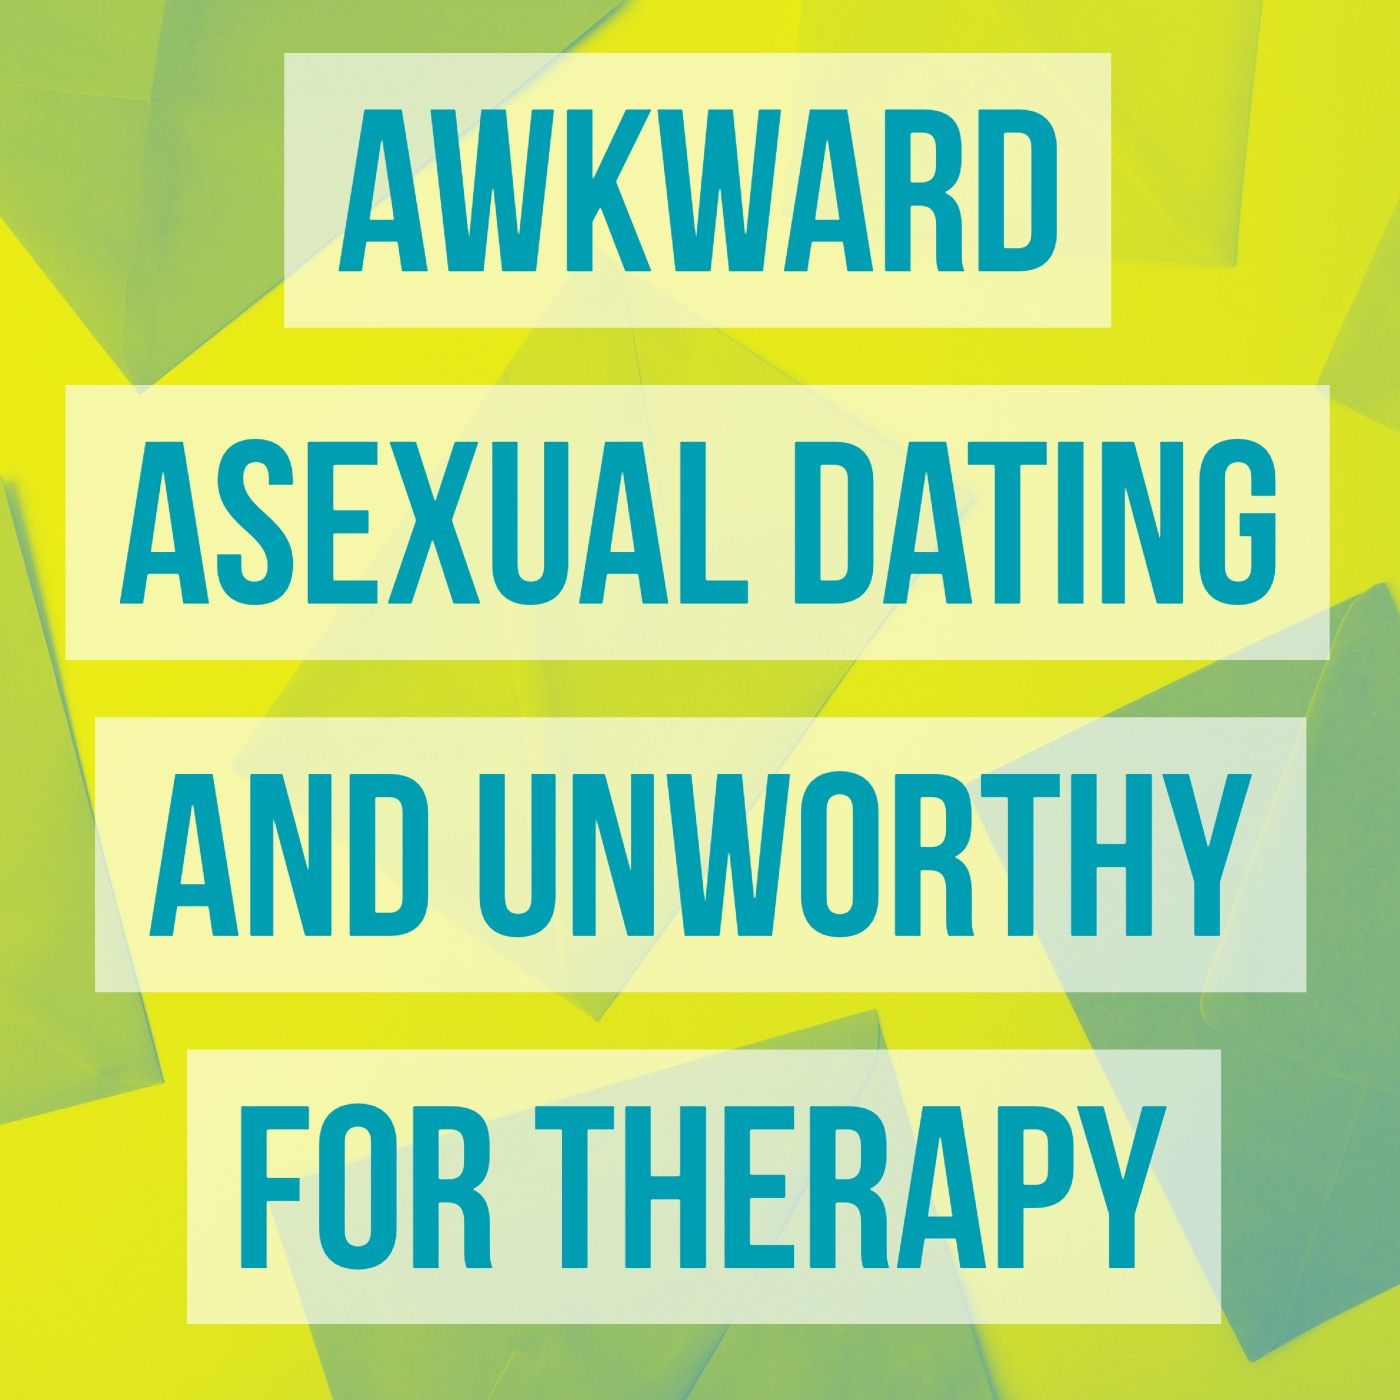 Awkward asexual dating and unworthy for therapy